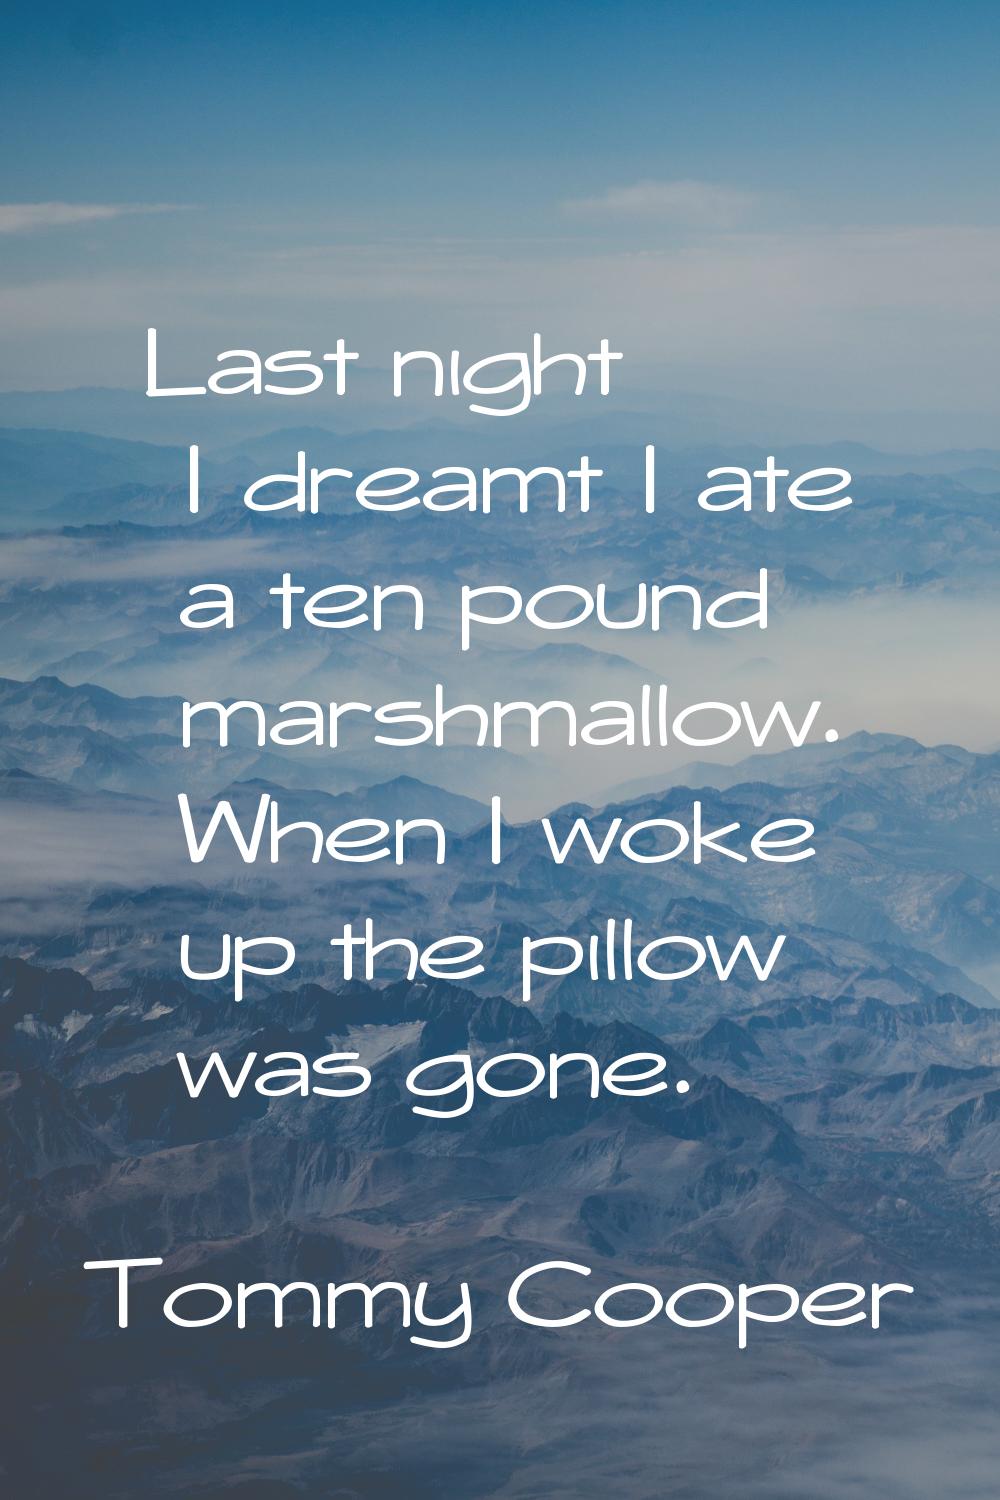 Last night I dreamt I ate a ten pound marshmallow. When I woke up the pillow was gone.